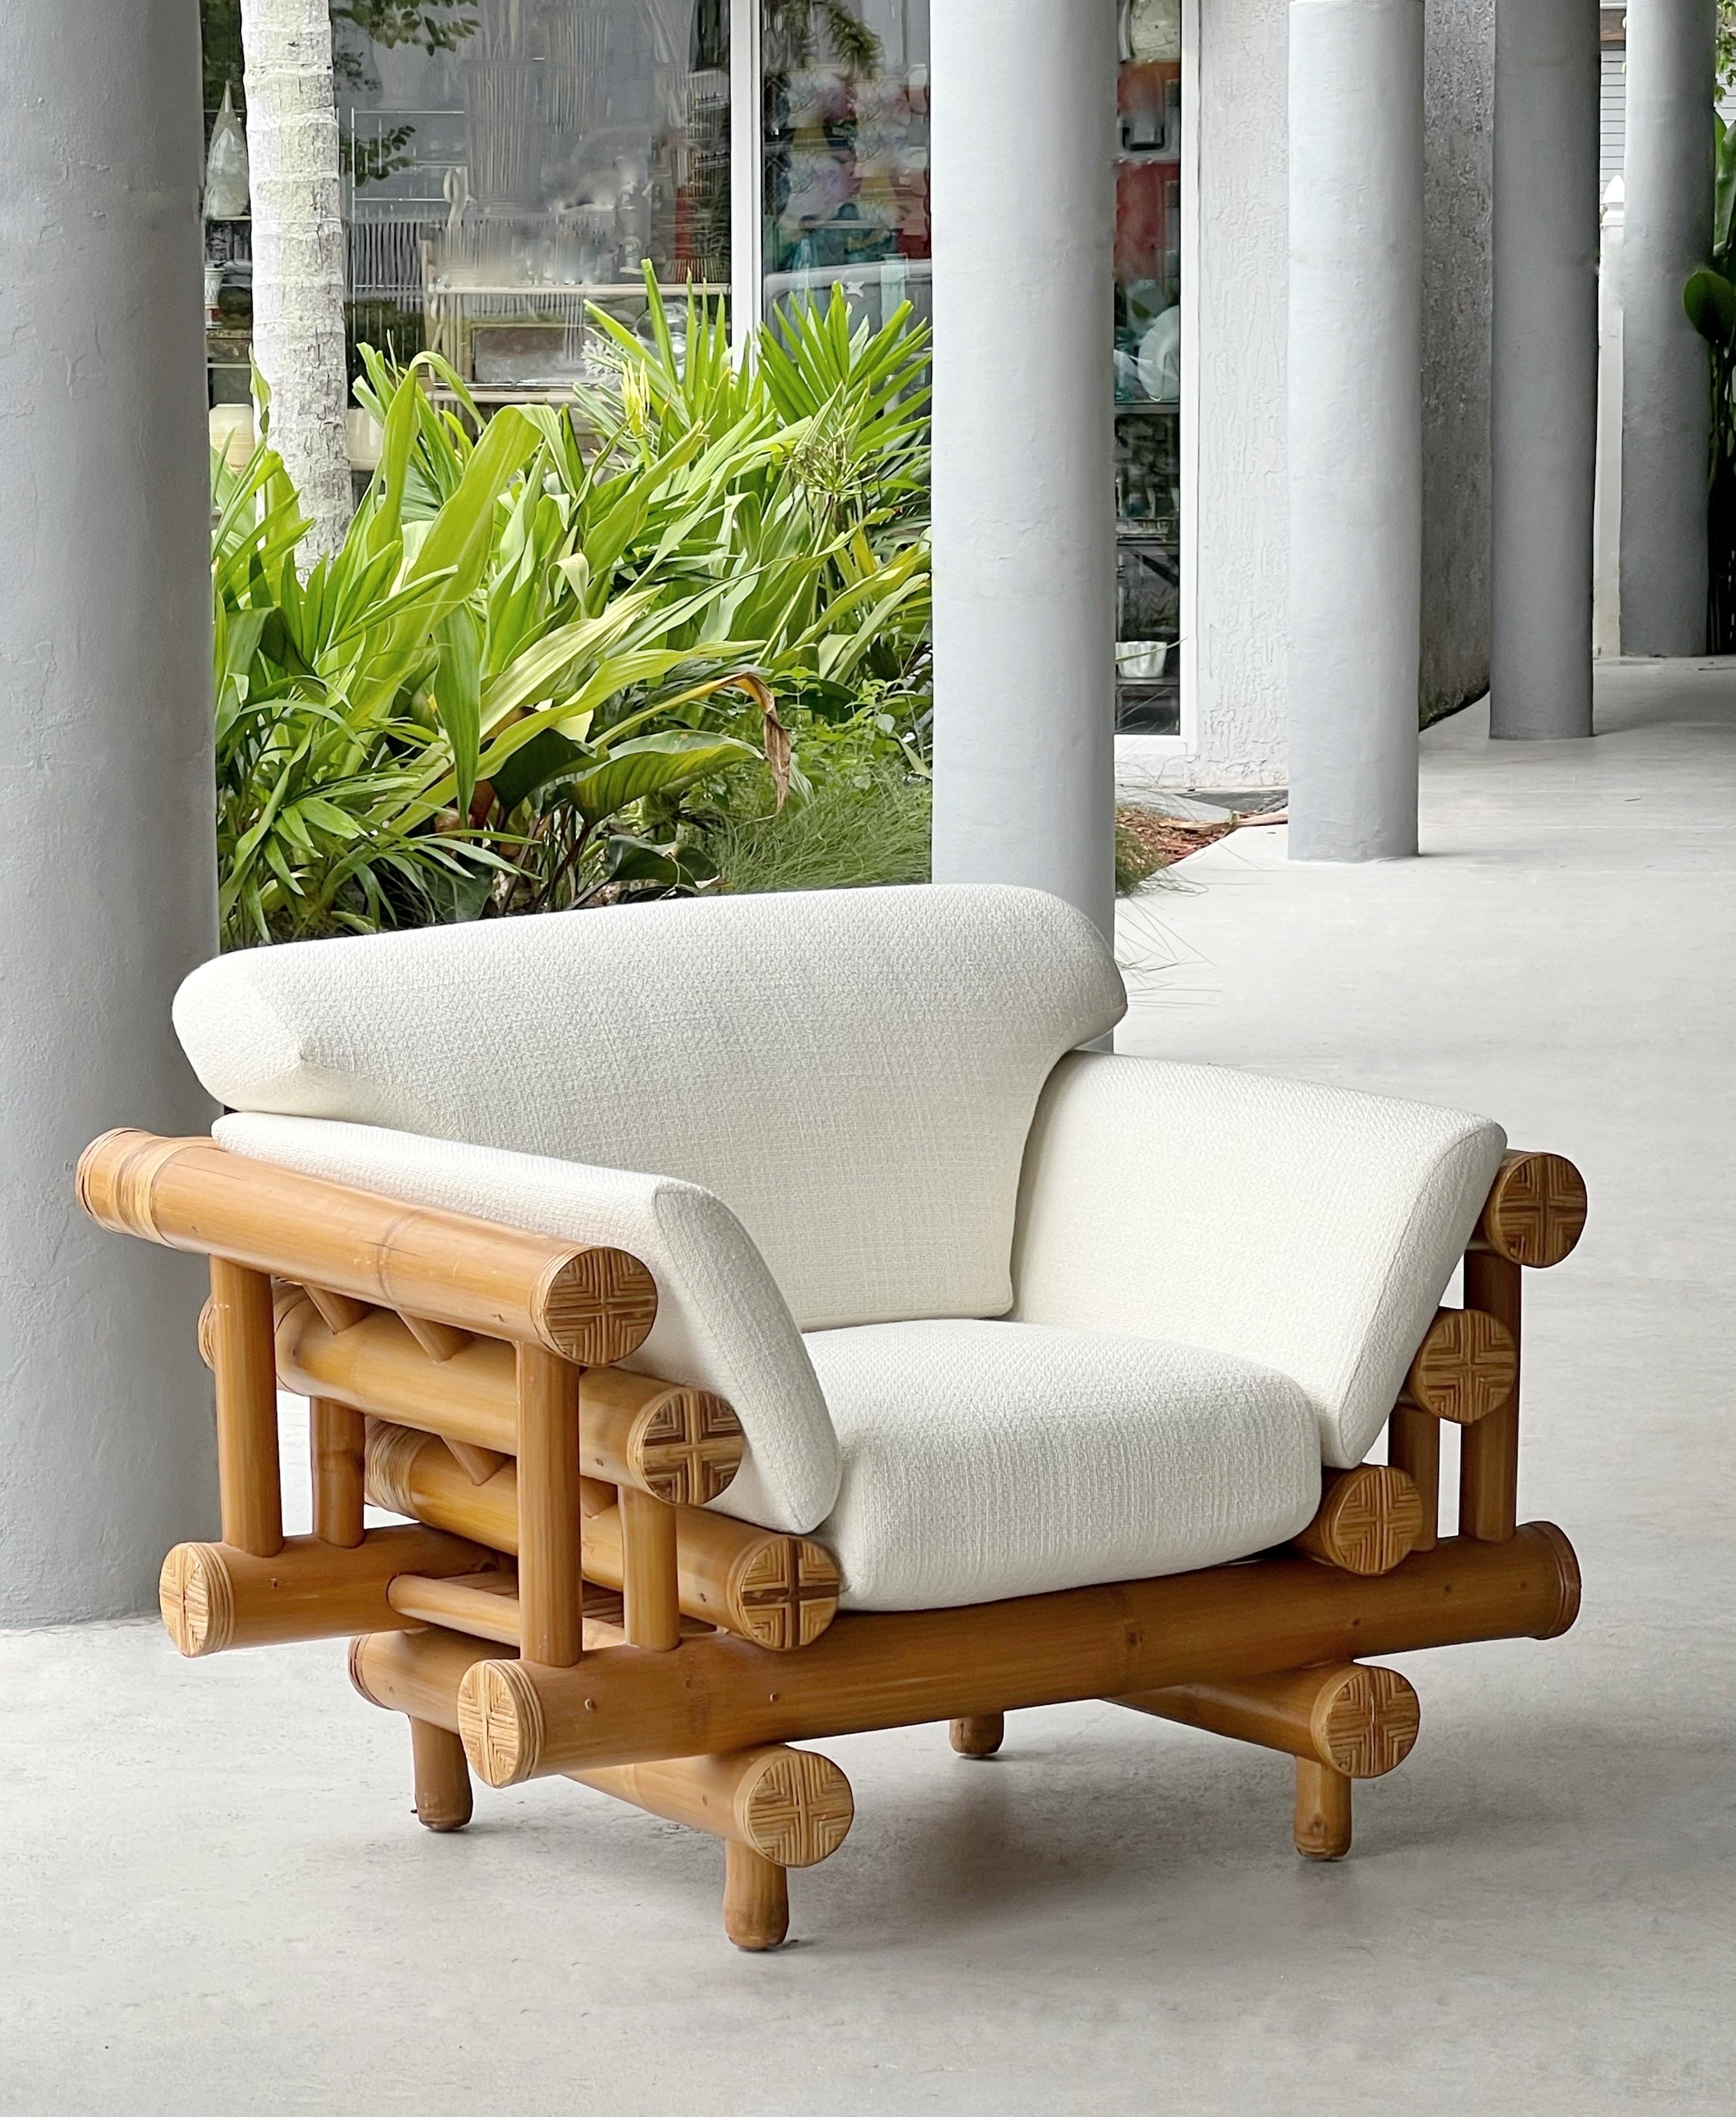 Philippine Pair of Sculptural 1970s Bamboo Lounge Chairs For Sale